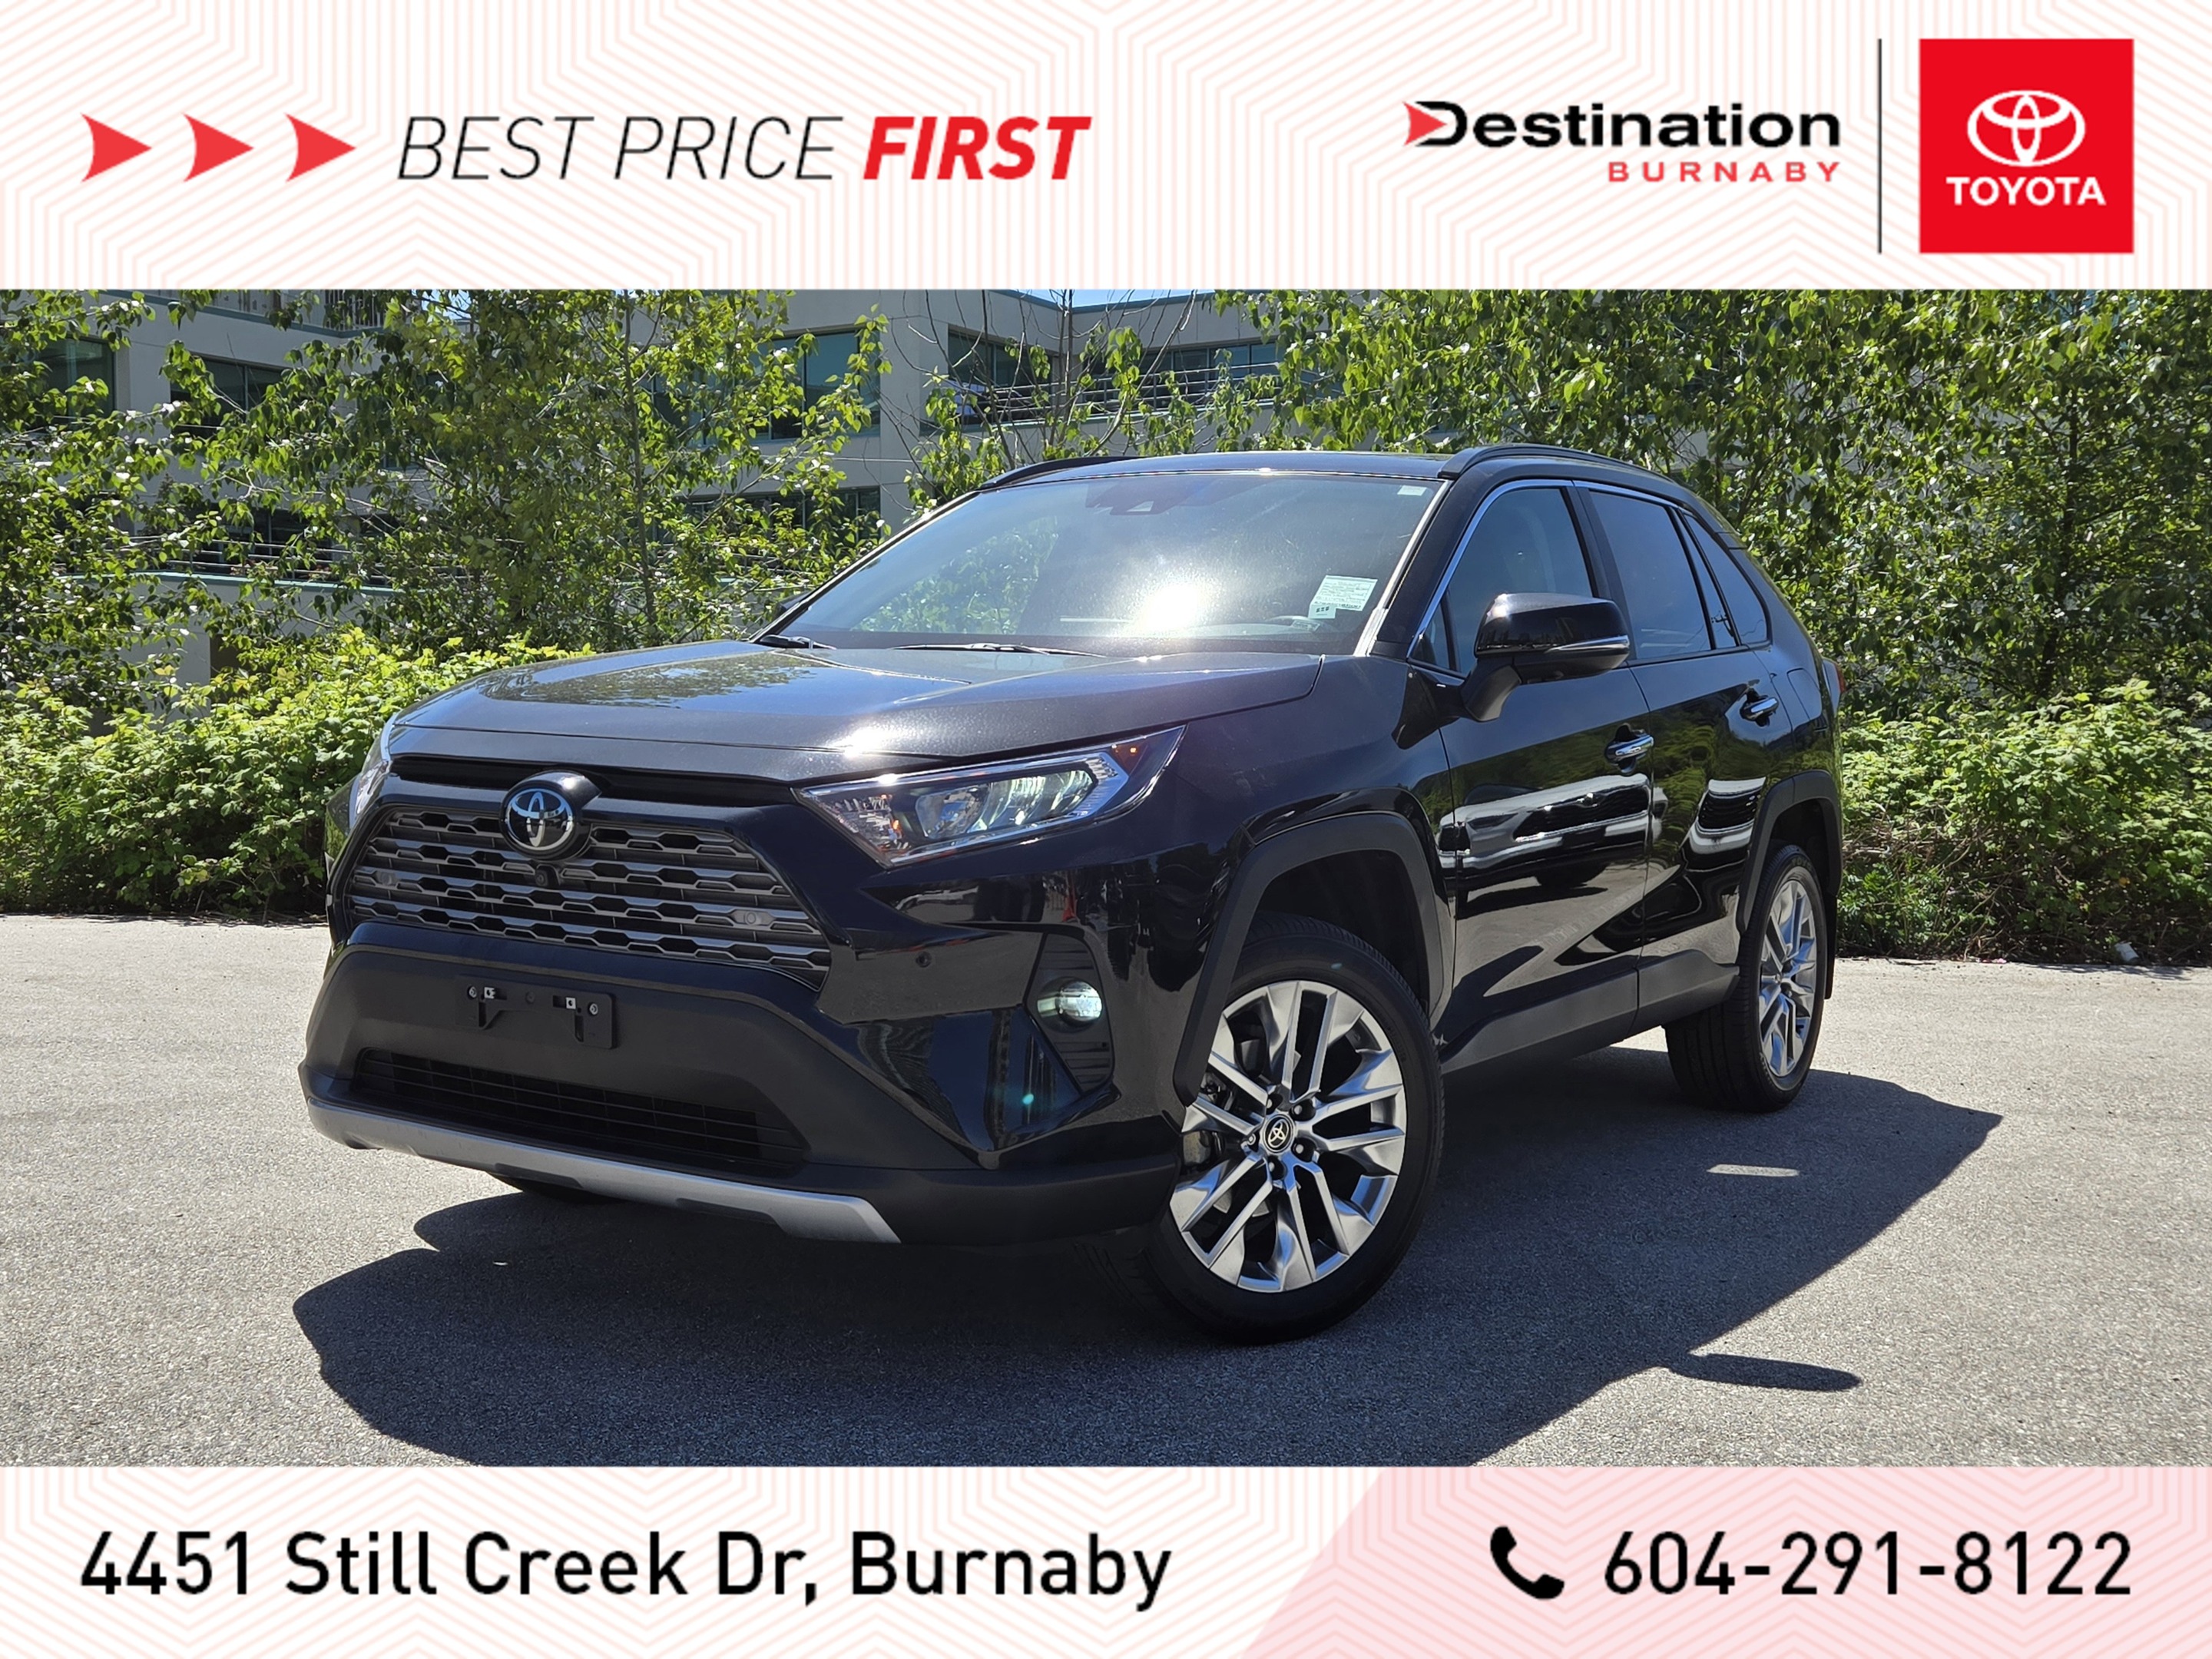 2021 Toyota RAV4 Limited AWD - Local, One Owner, Fully Loaded!